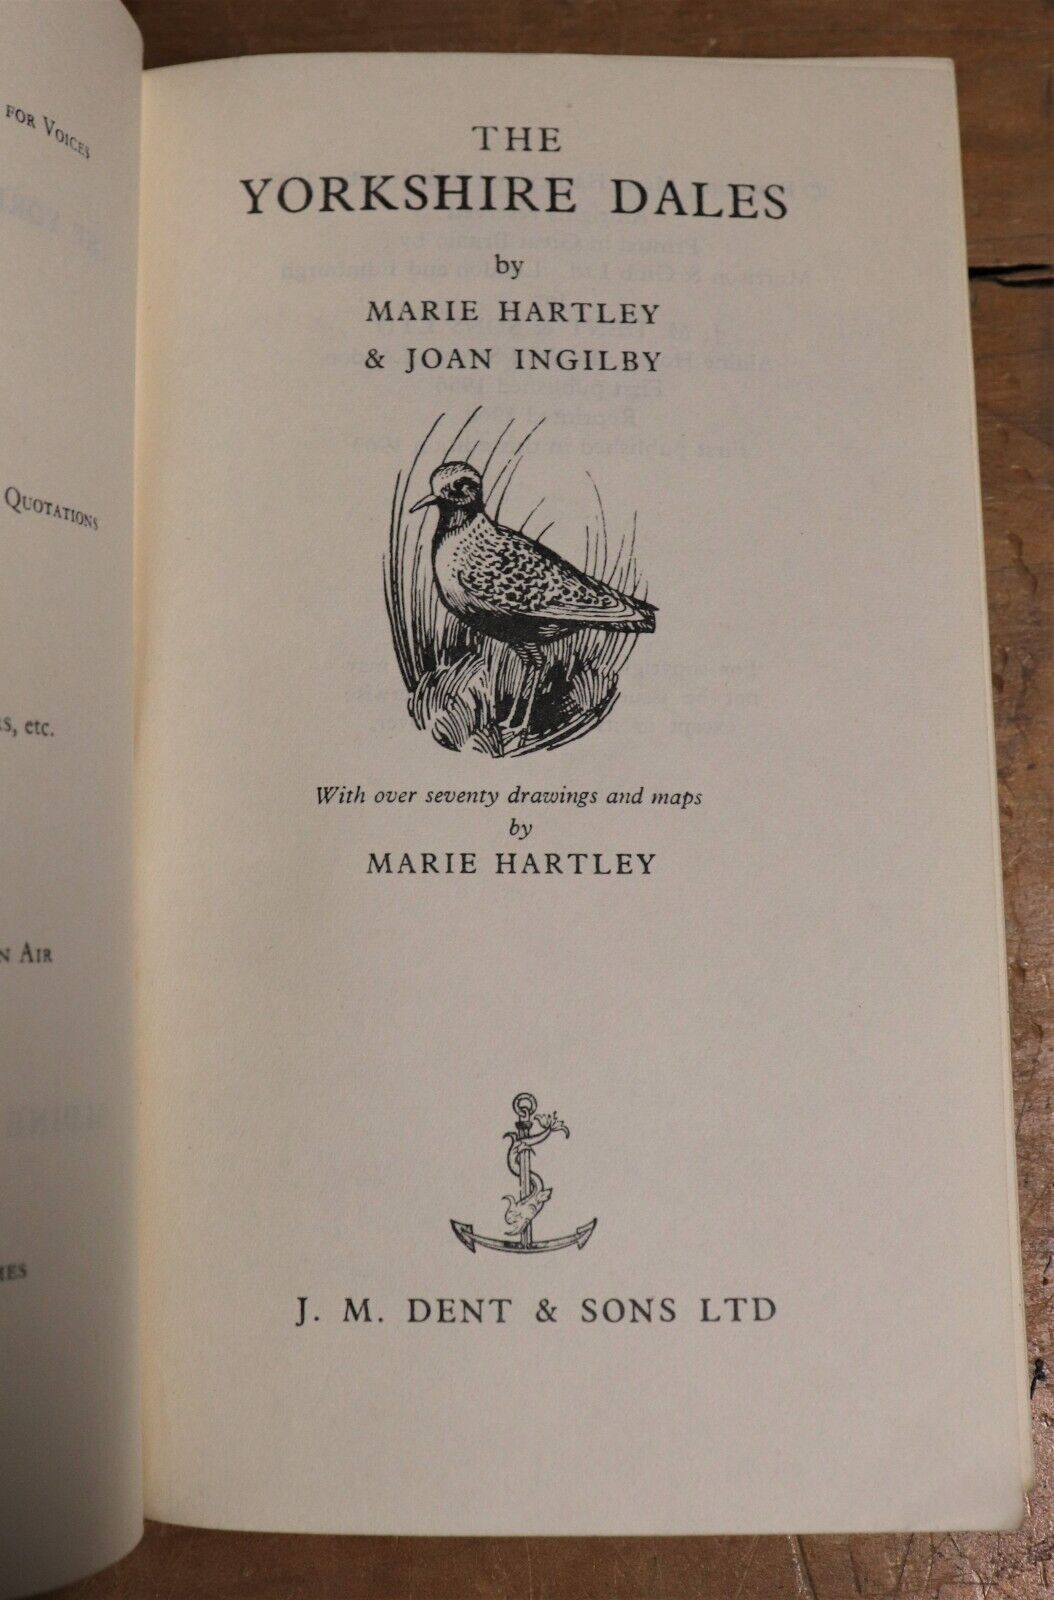 The Yorkshire Dales by Marie Hartley  - 1963 - British History Book - 0